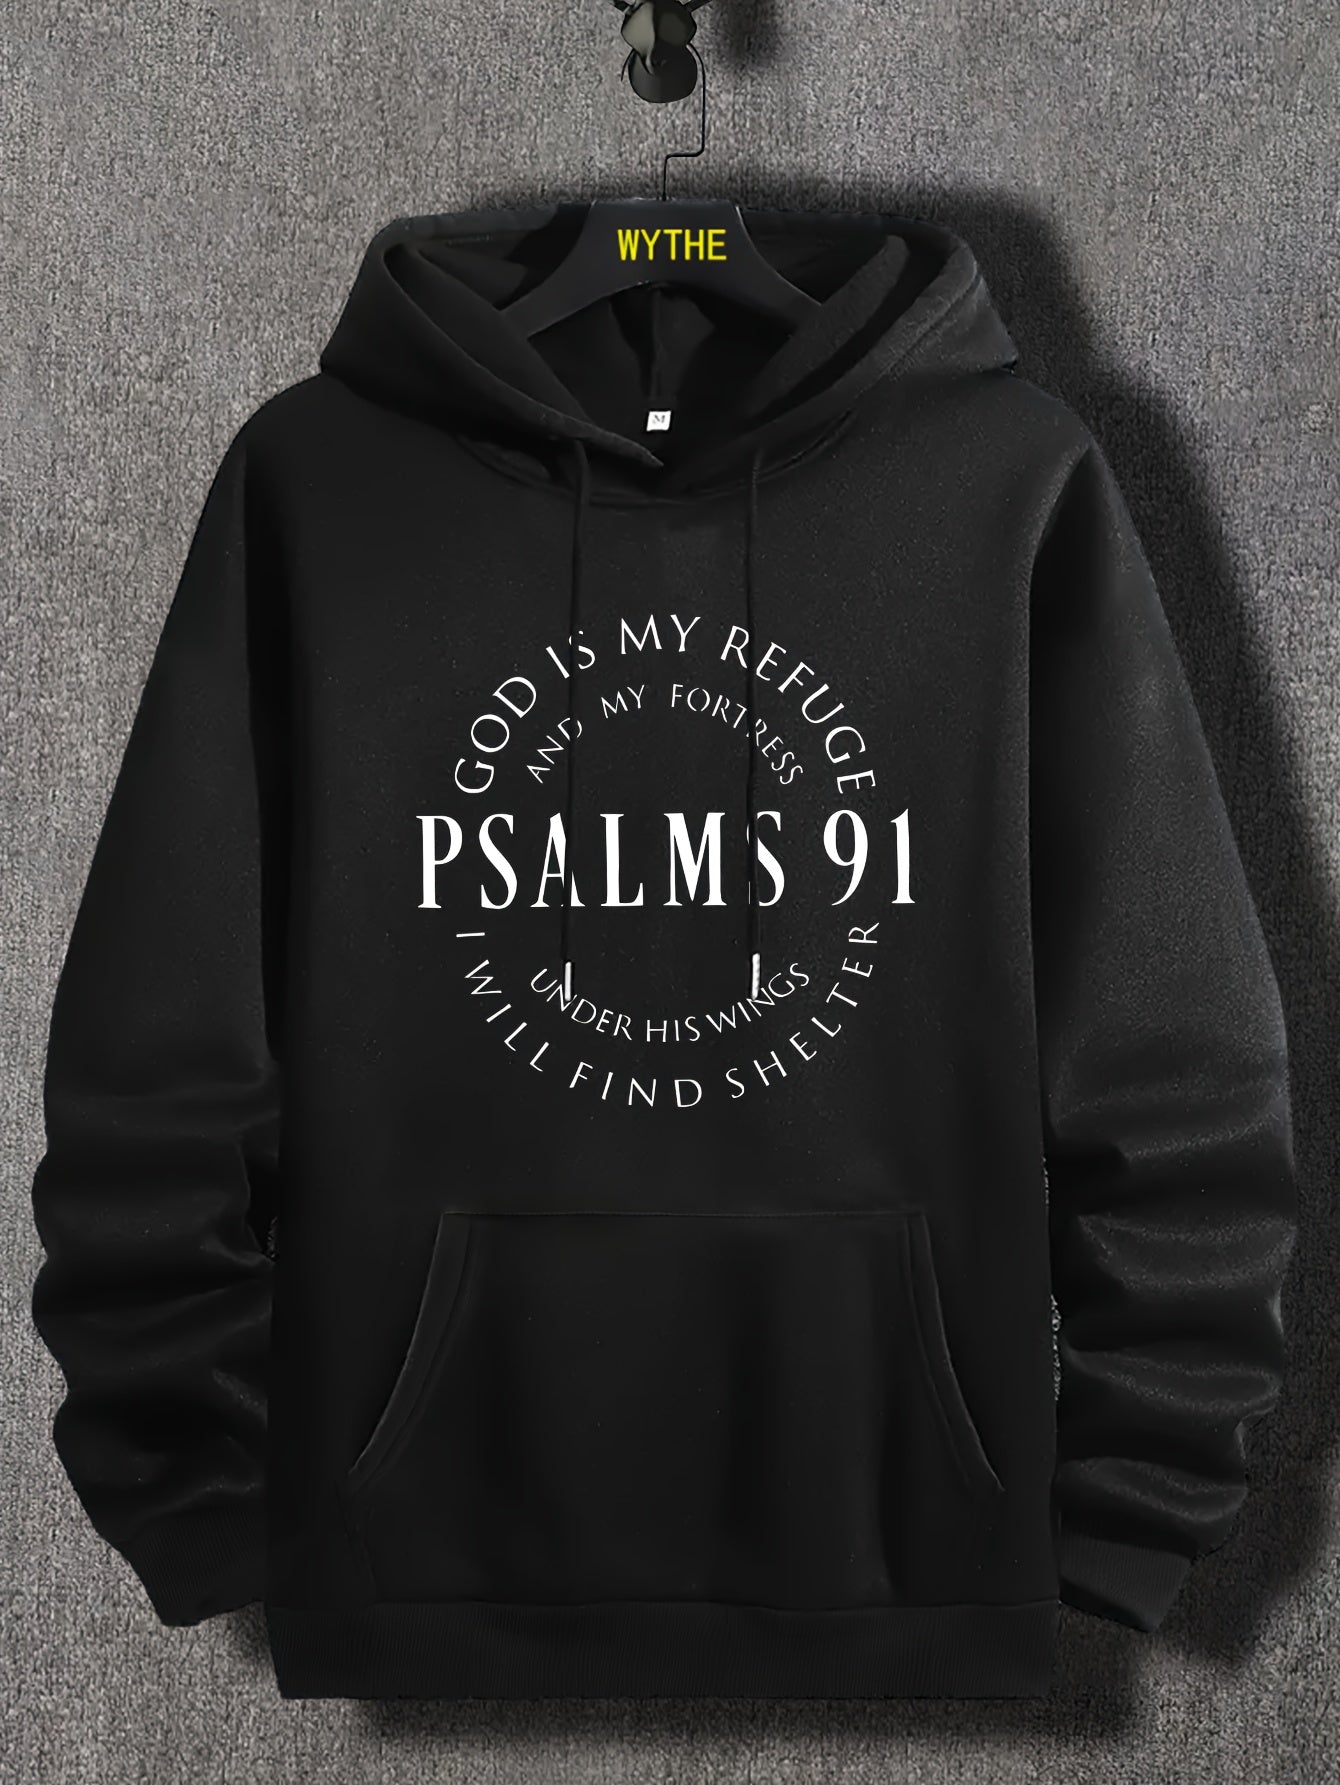 PSALMS 91 Print Hoodies For Men, Graphic Hoodie With Kangaroo Pocket, Comfy Loose Drawstring Trendy Hooded Pullover, Mens Clothing For Autumn Winter